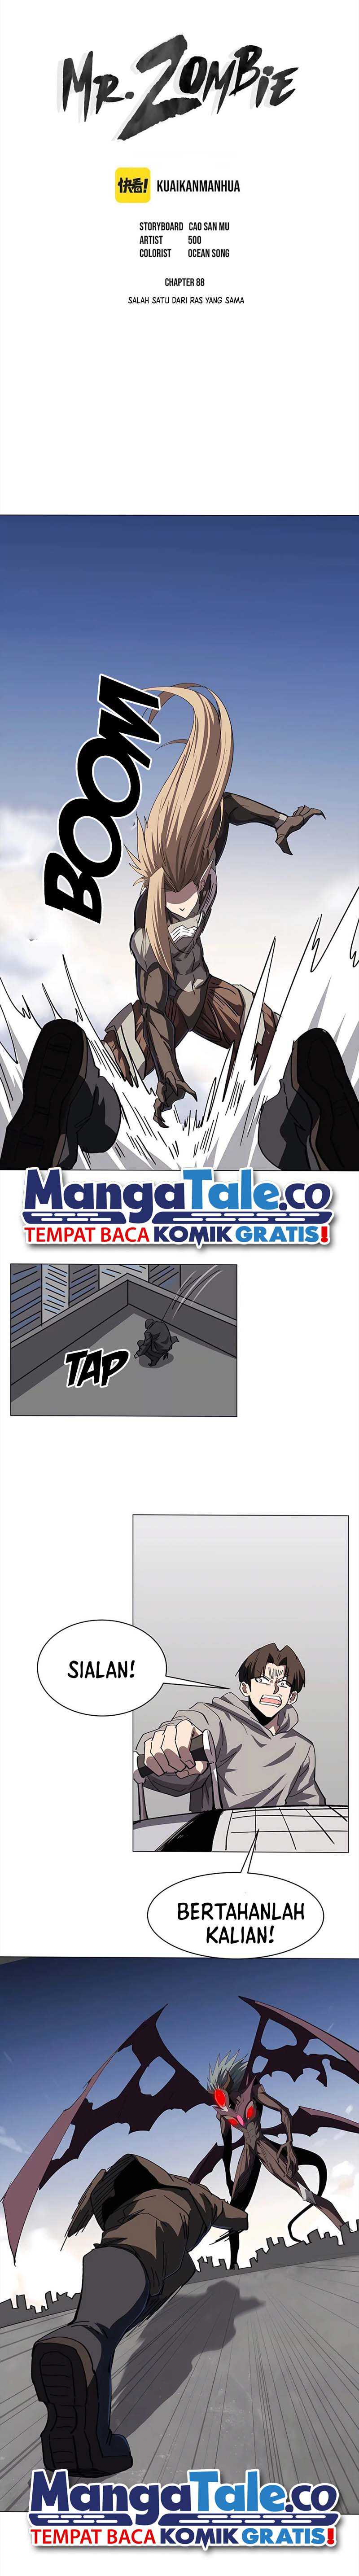 Mr. Zombie Chapter 88 Image 1